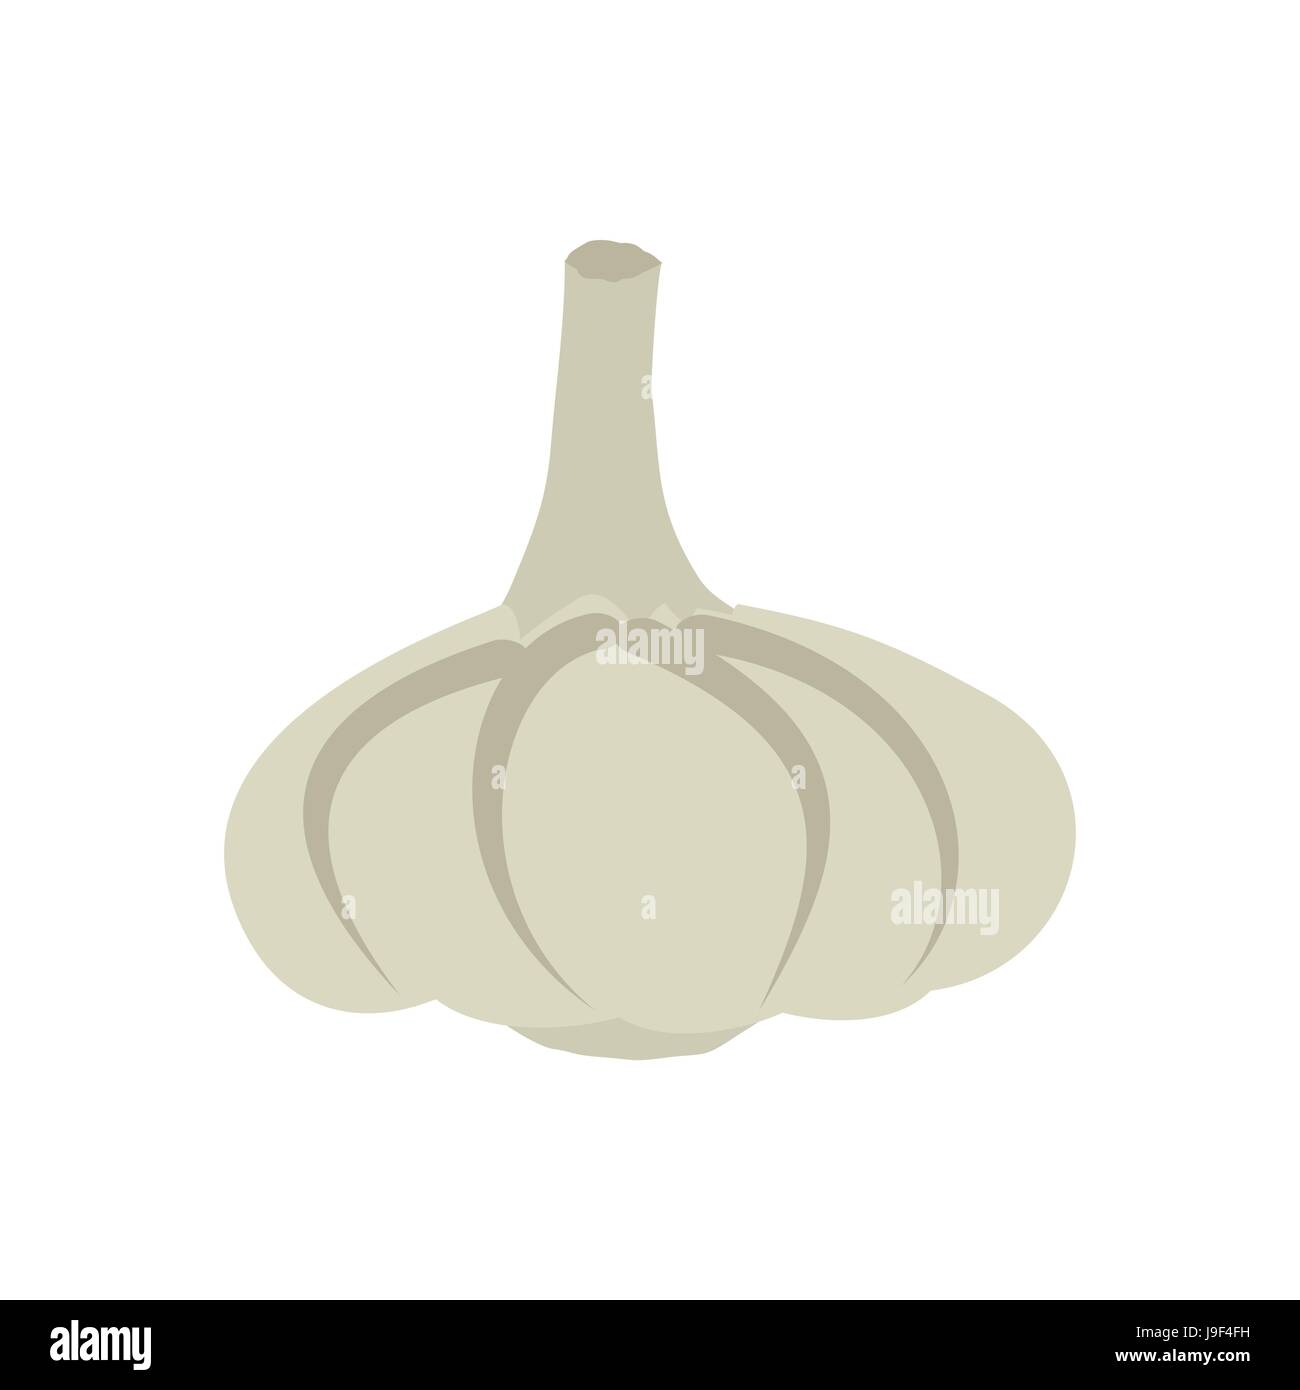 Garlic isolated. Vegetables on white background. Plant pungent taste and unpleasant smell Stock Vector